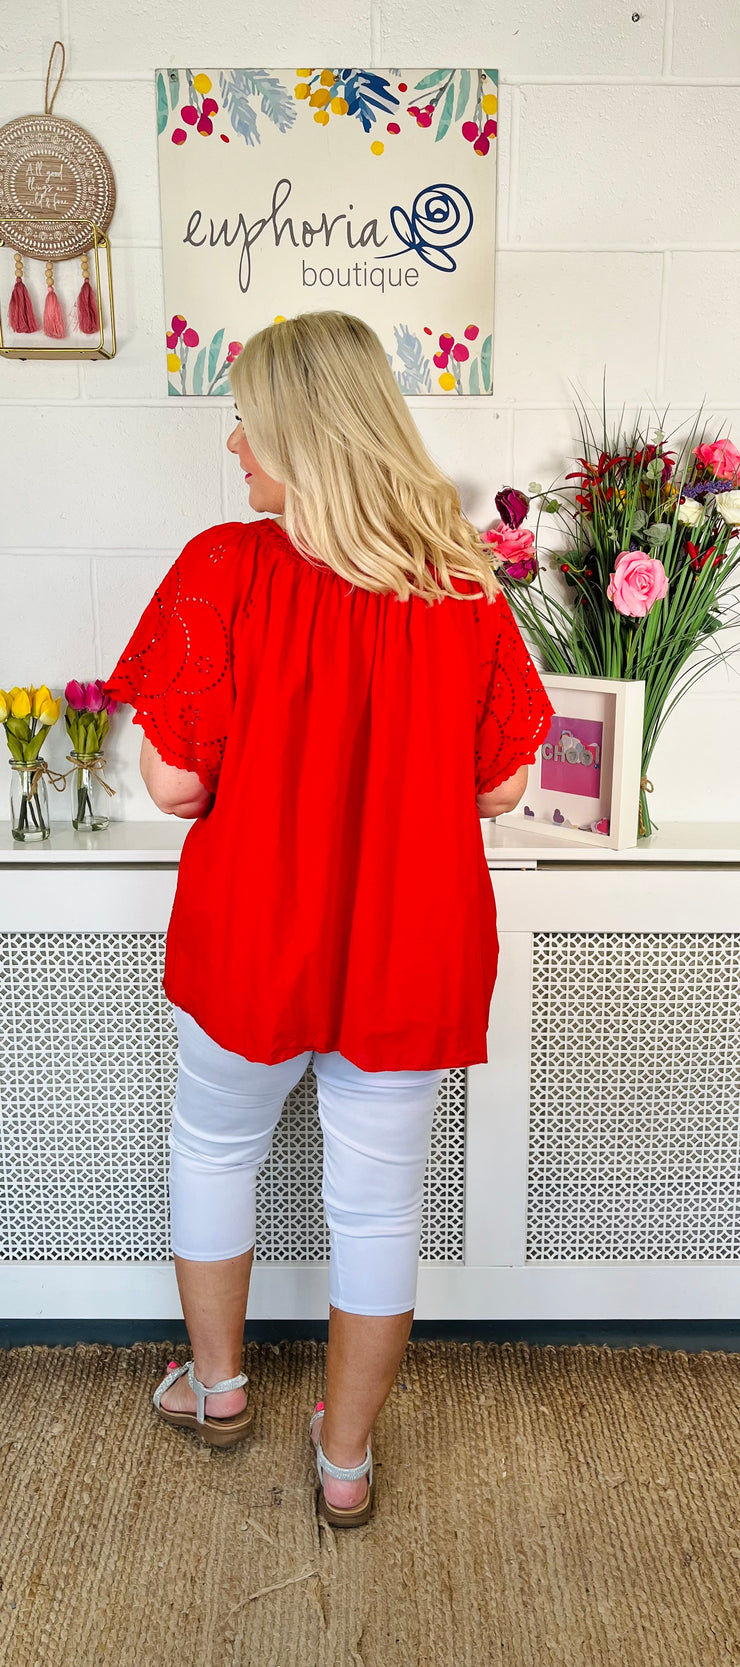 August Cotton Top - Red